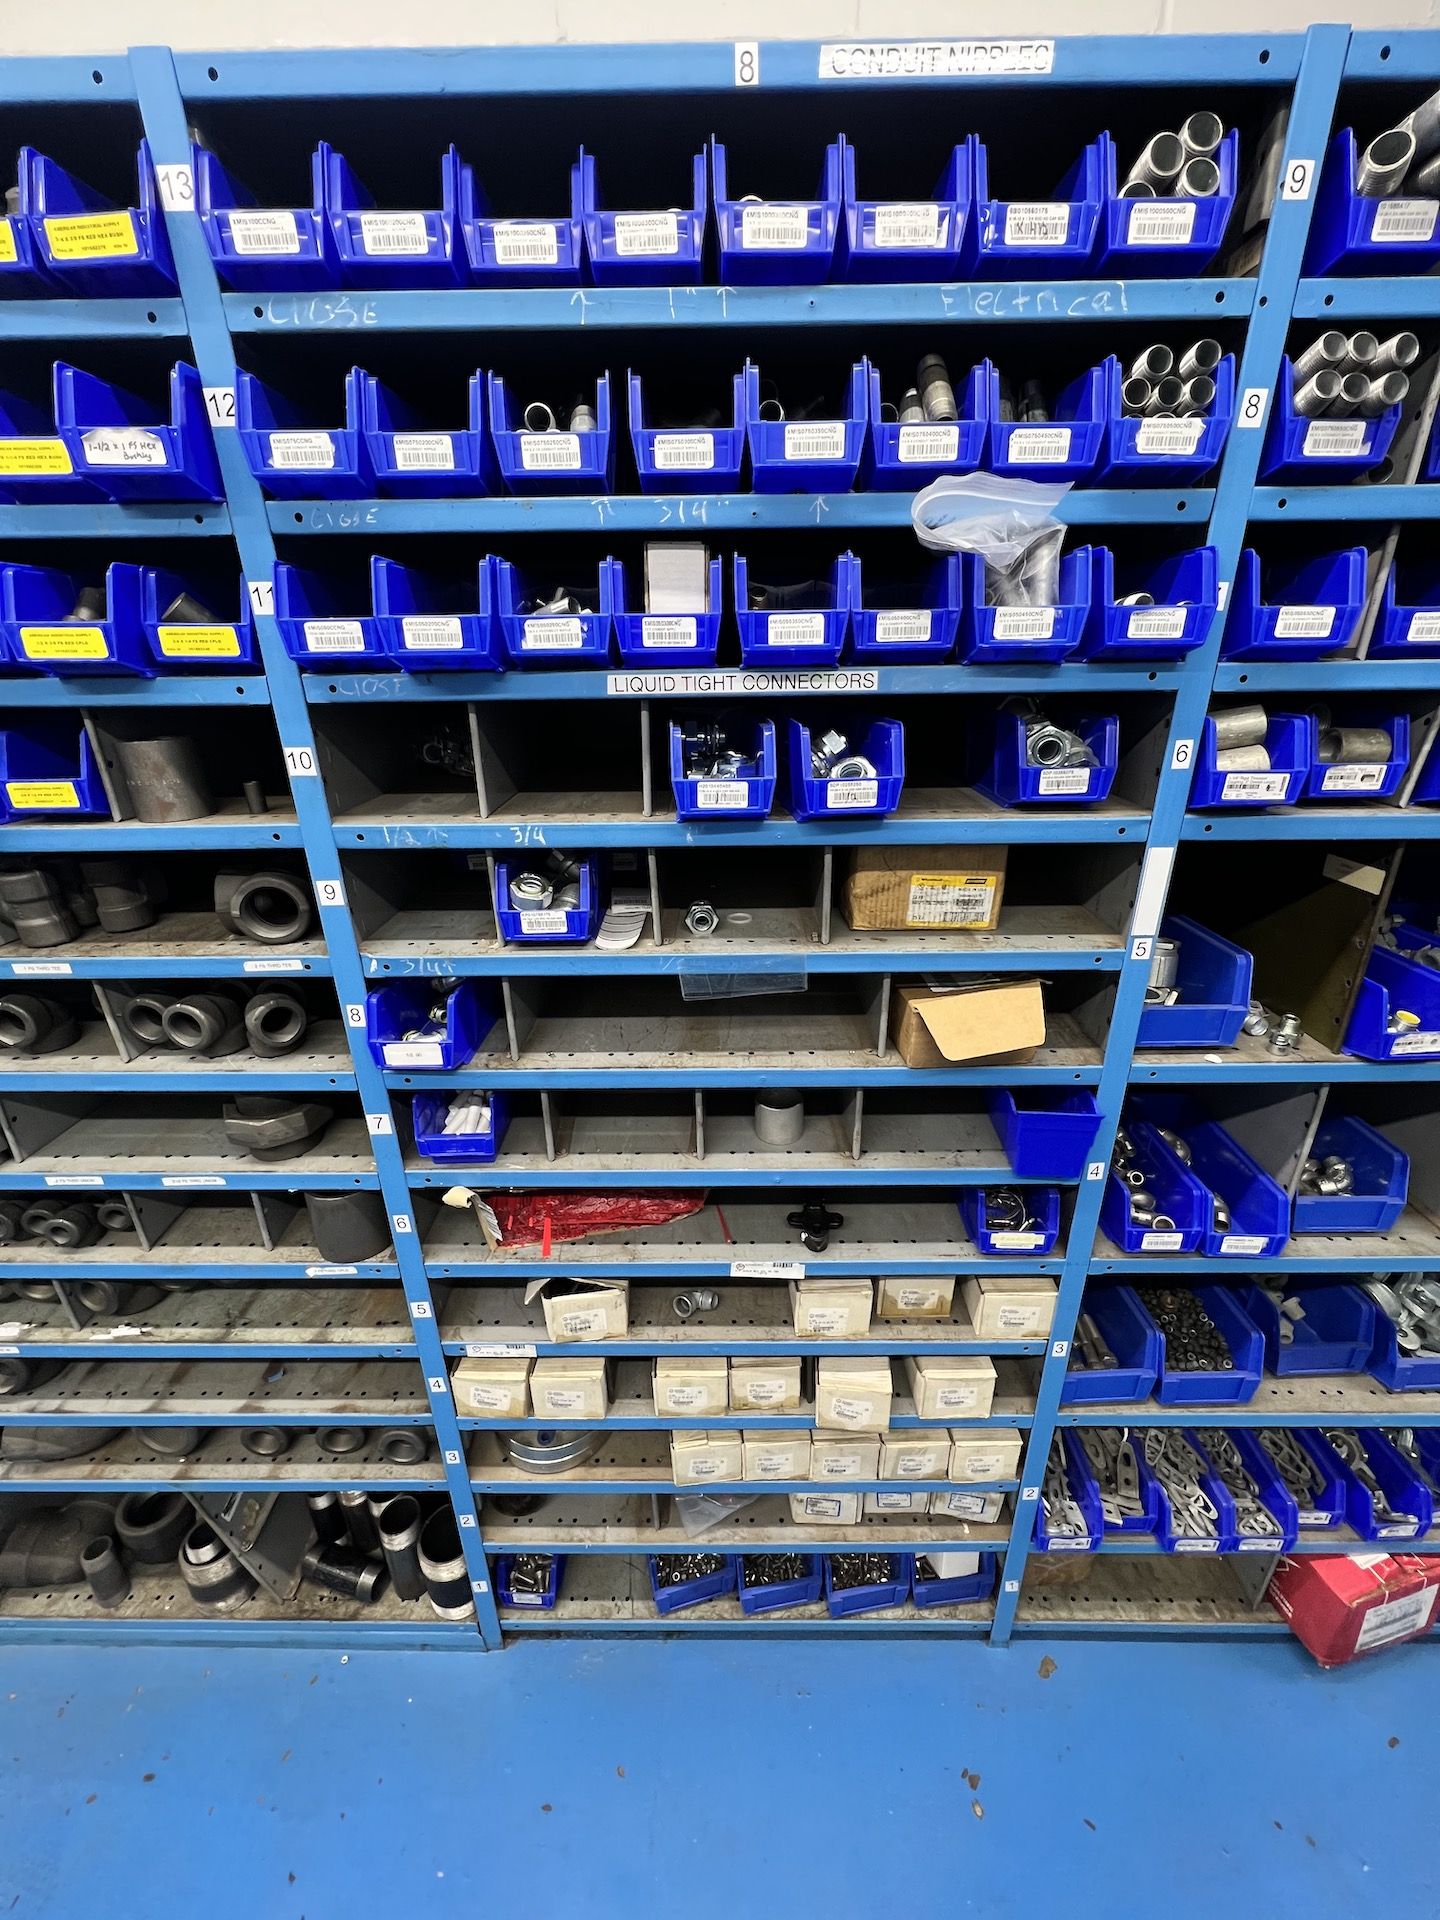 LOT OF ASSORTED PLUMBING FITTINGS, INCLUDES ELBOWS, COUPLINGS, UNIONS, ADAPTERS, AND MUCH MORE - Image 14 of 18